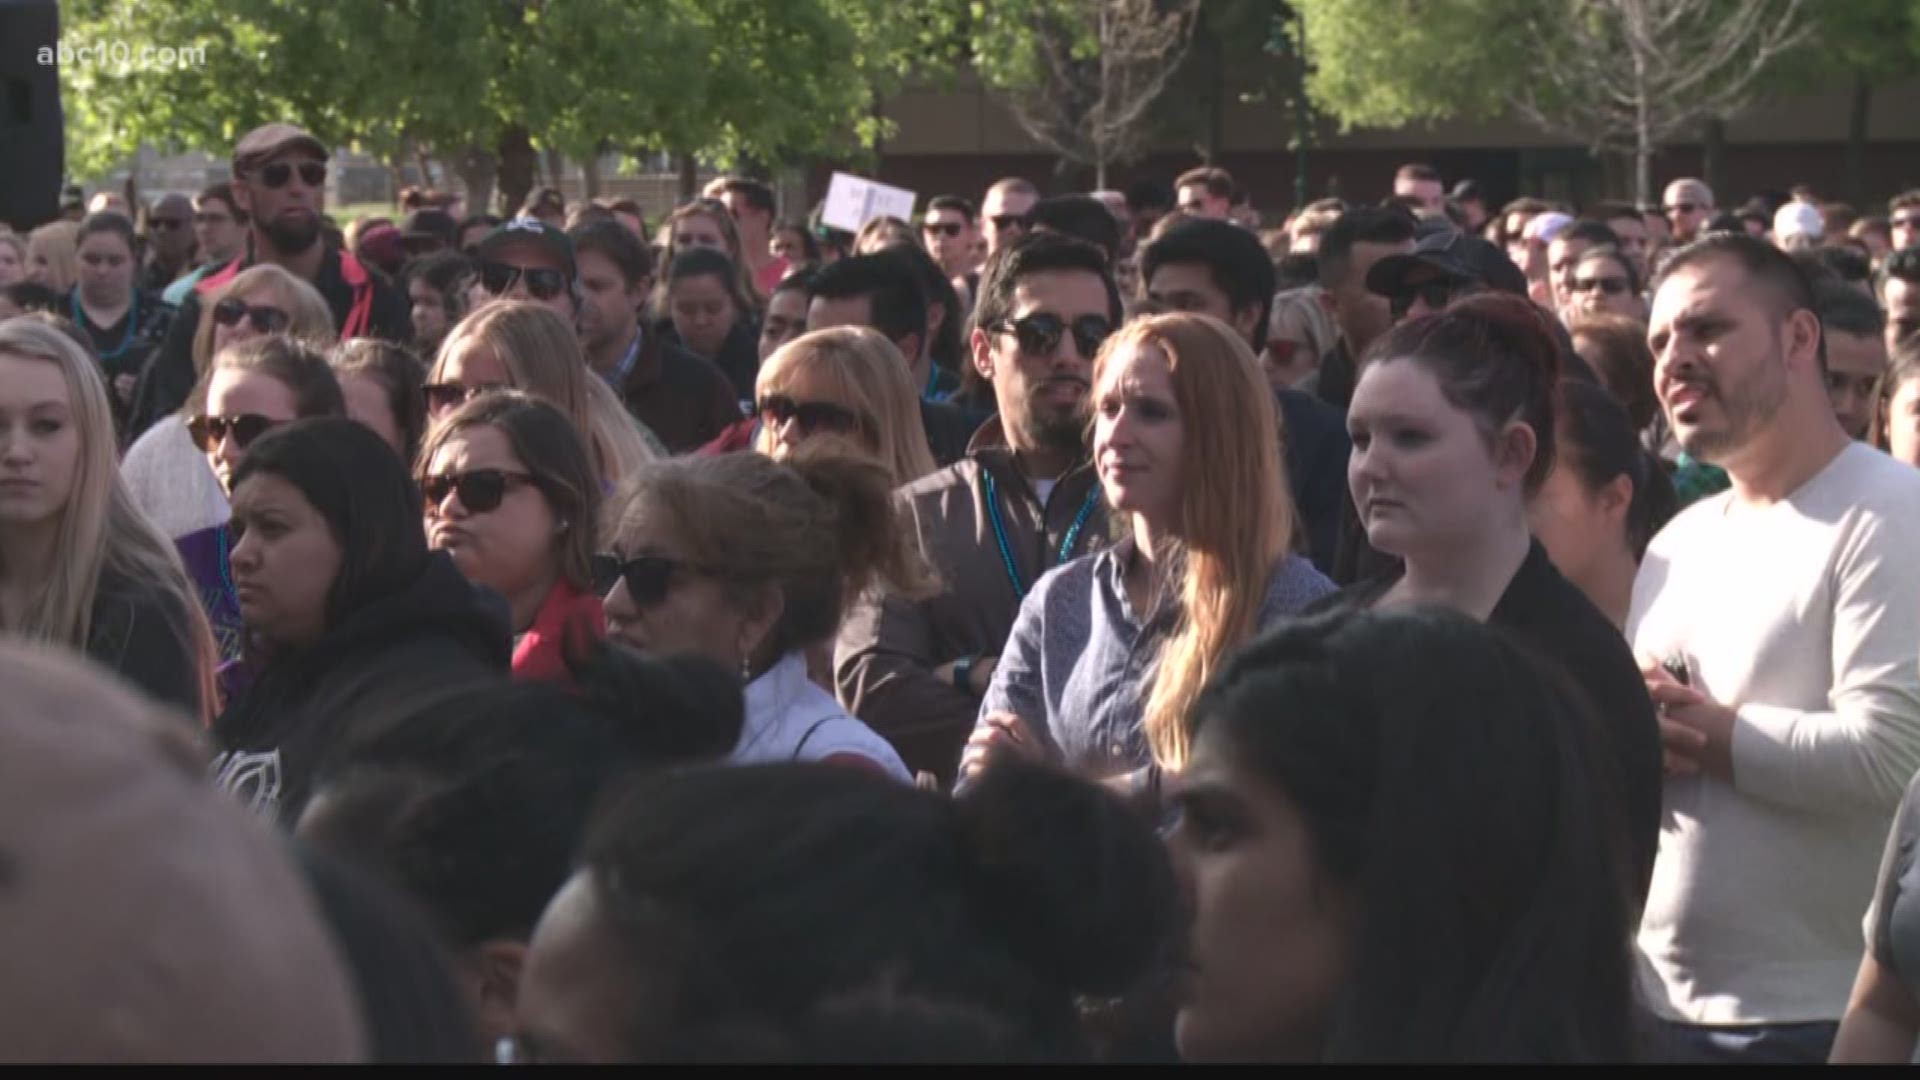 Students at Sacramento State are hoping to break the mental health stigma.